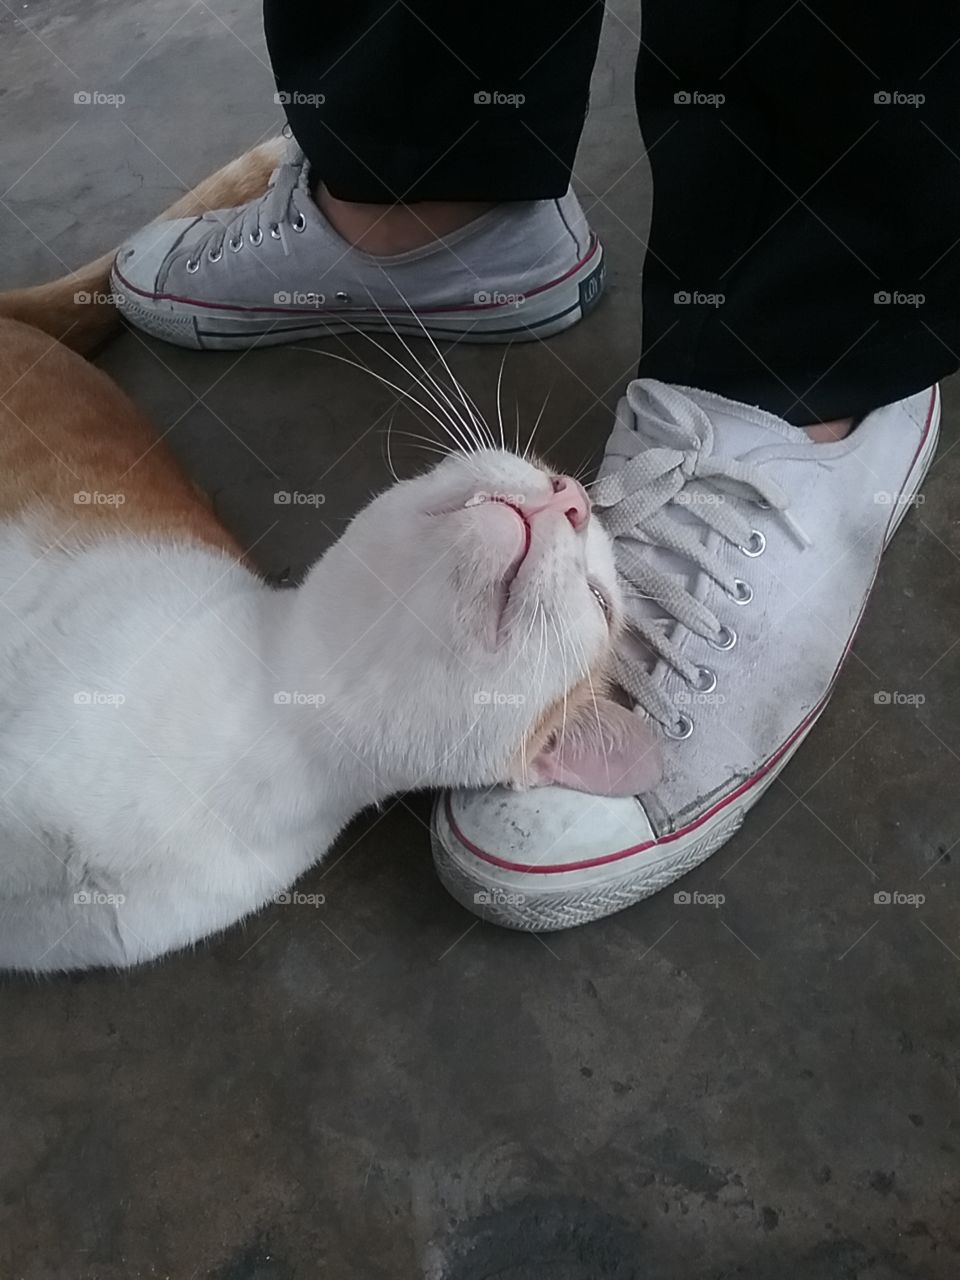 My best pillow is his shoe!